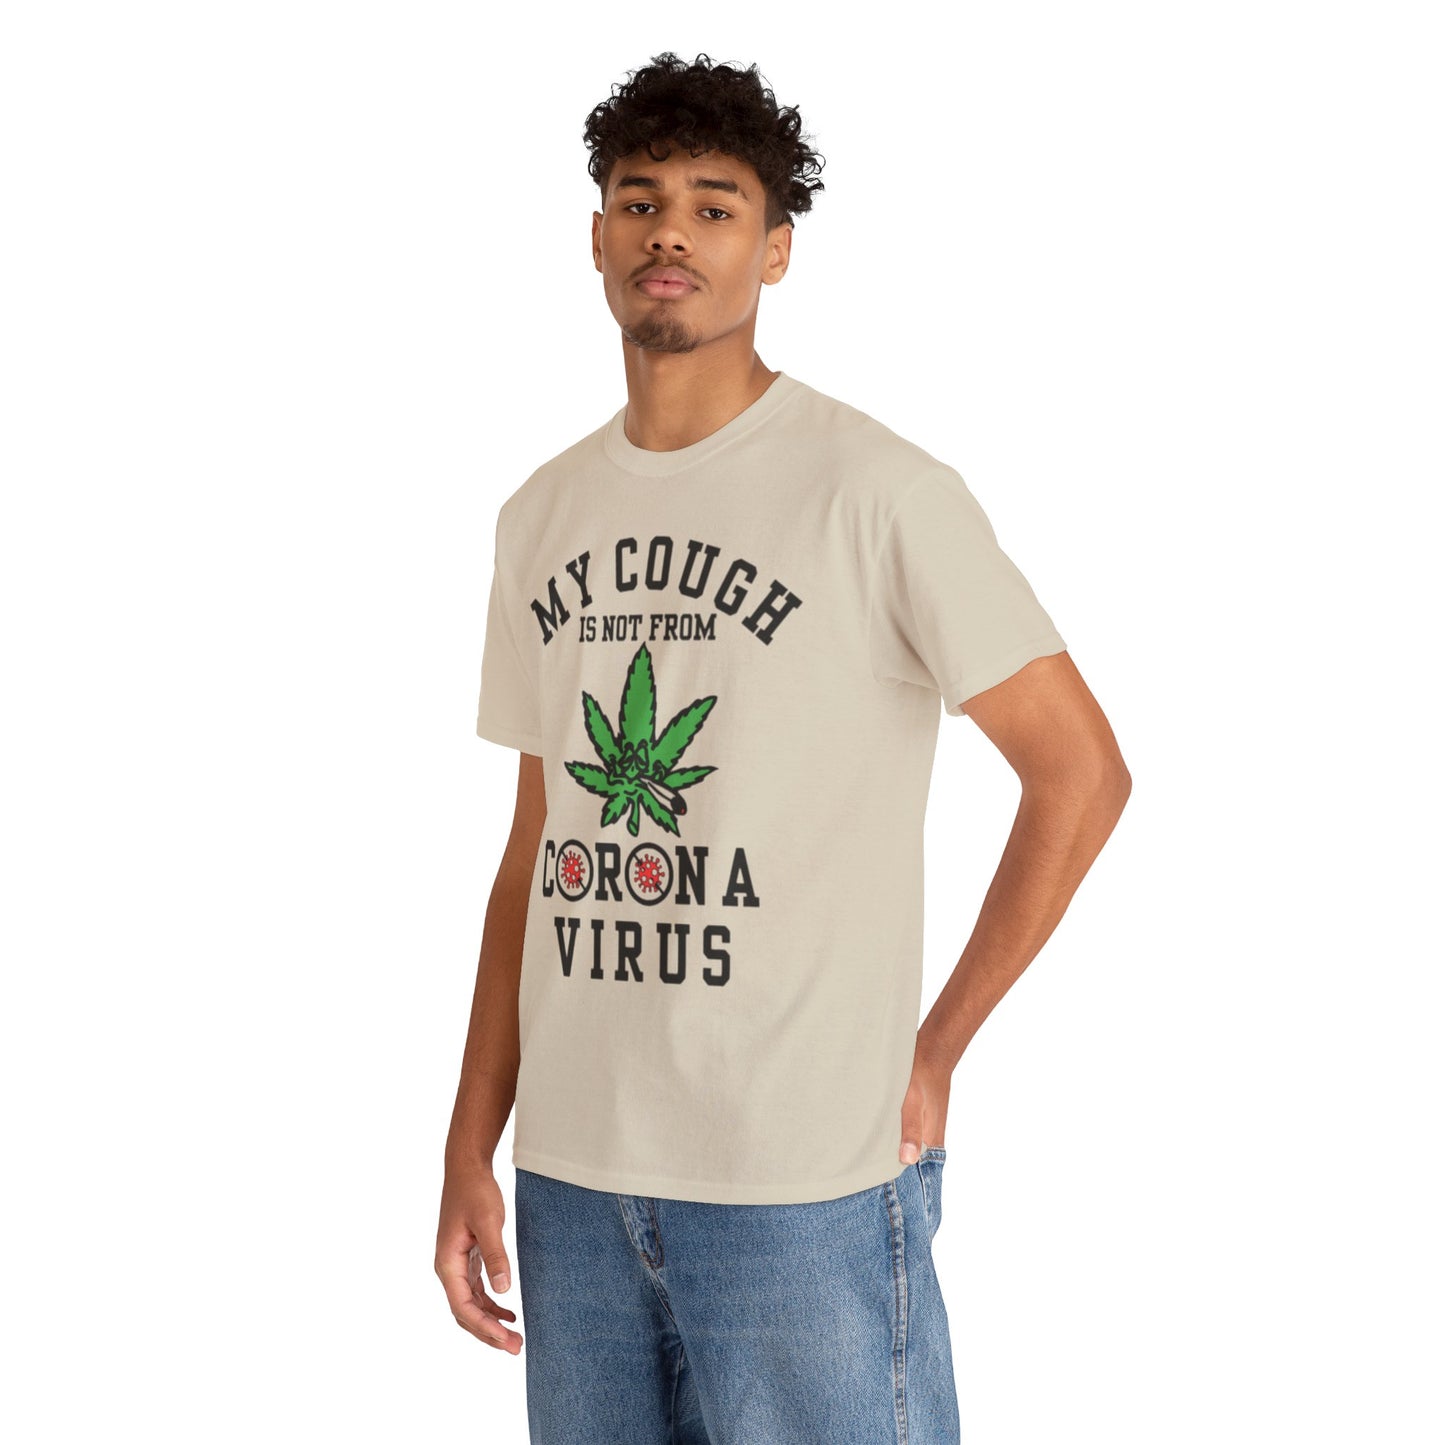 My Cough Is Not From Corona Virus Cotton Tee